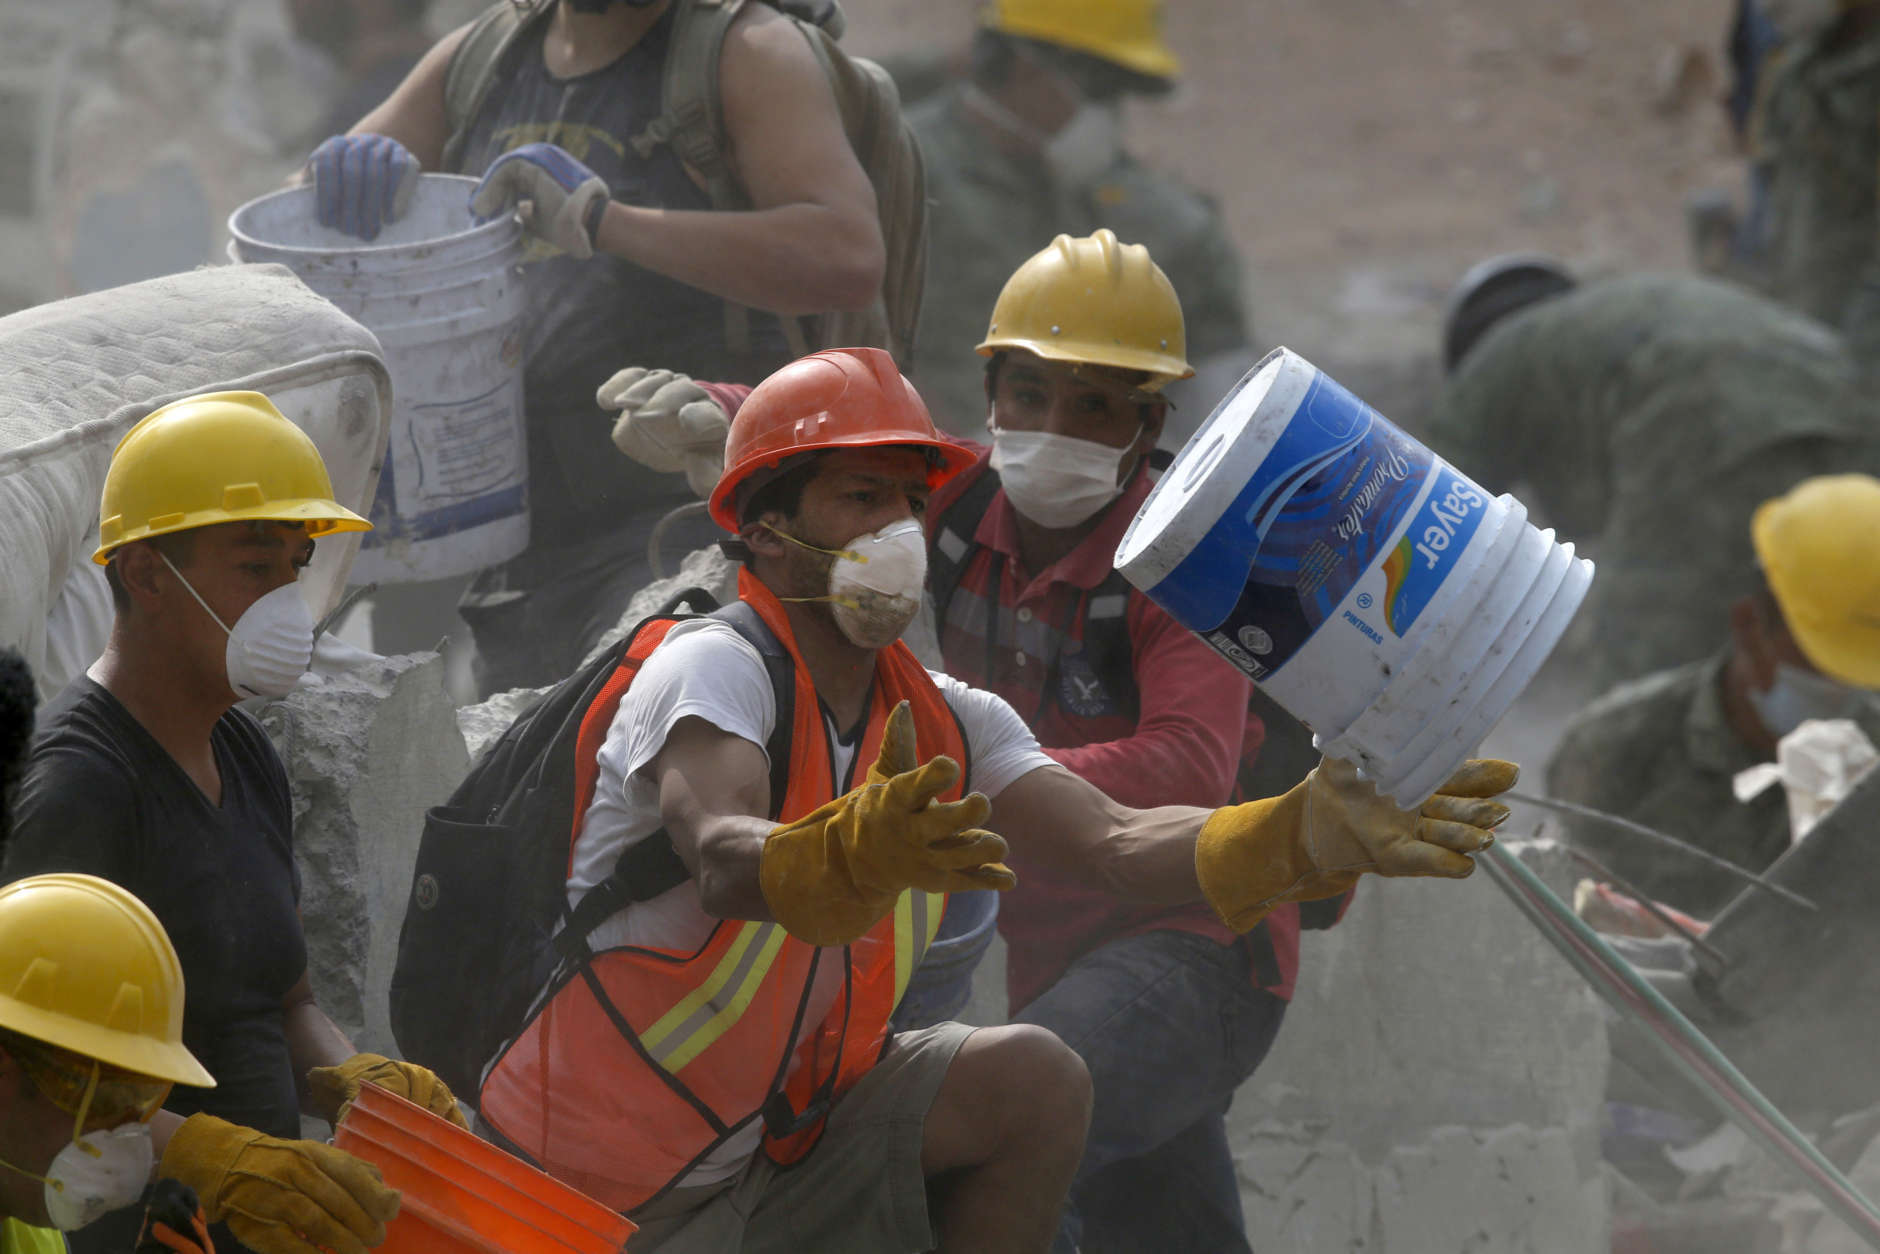 A volunteer catches a bucket during rescue efforts at a collapsed building in La Condesa neighborhood of Mexico City, Thursday, Sept. 21, 2017. Thousands of professionals and volunteers are working frantically at dozens of wrecked buildings across the capital and nearby states looking for survivors of the powerful quake that hit Tuesday. (AP Photo/Marco Ugarte)